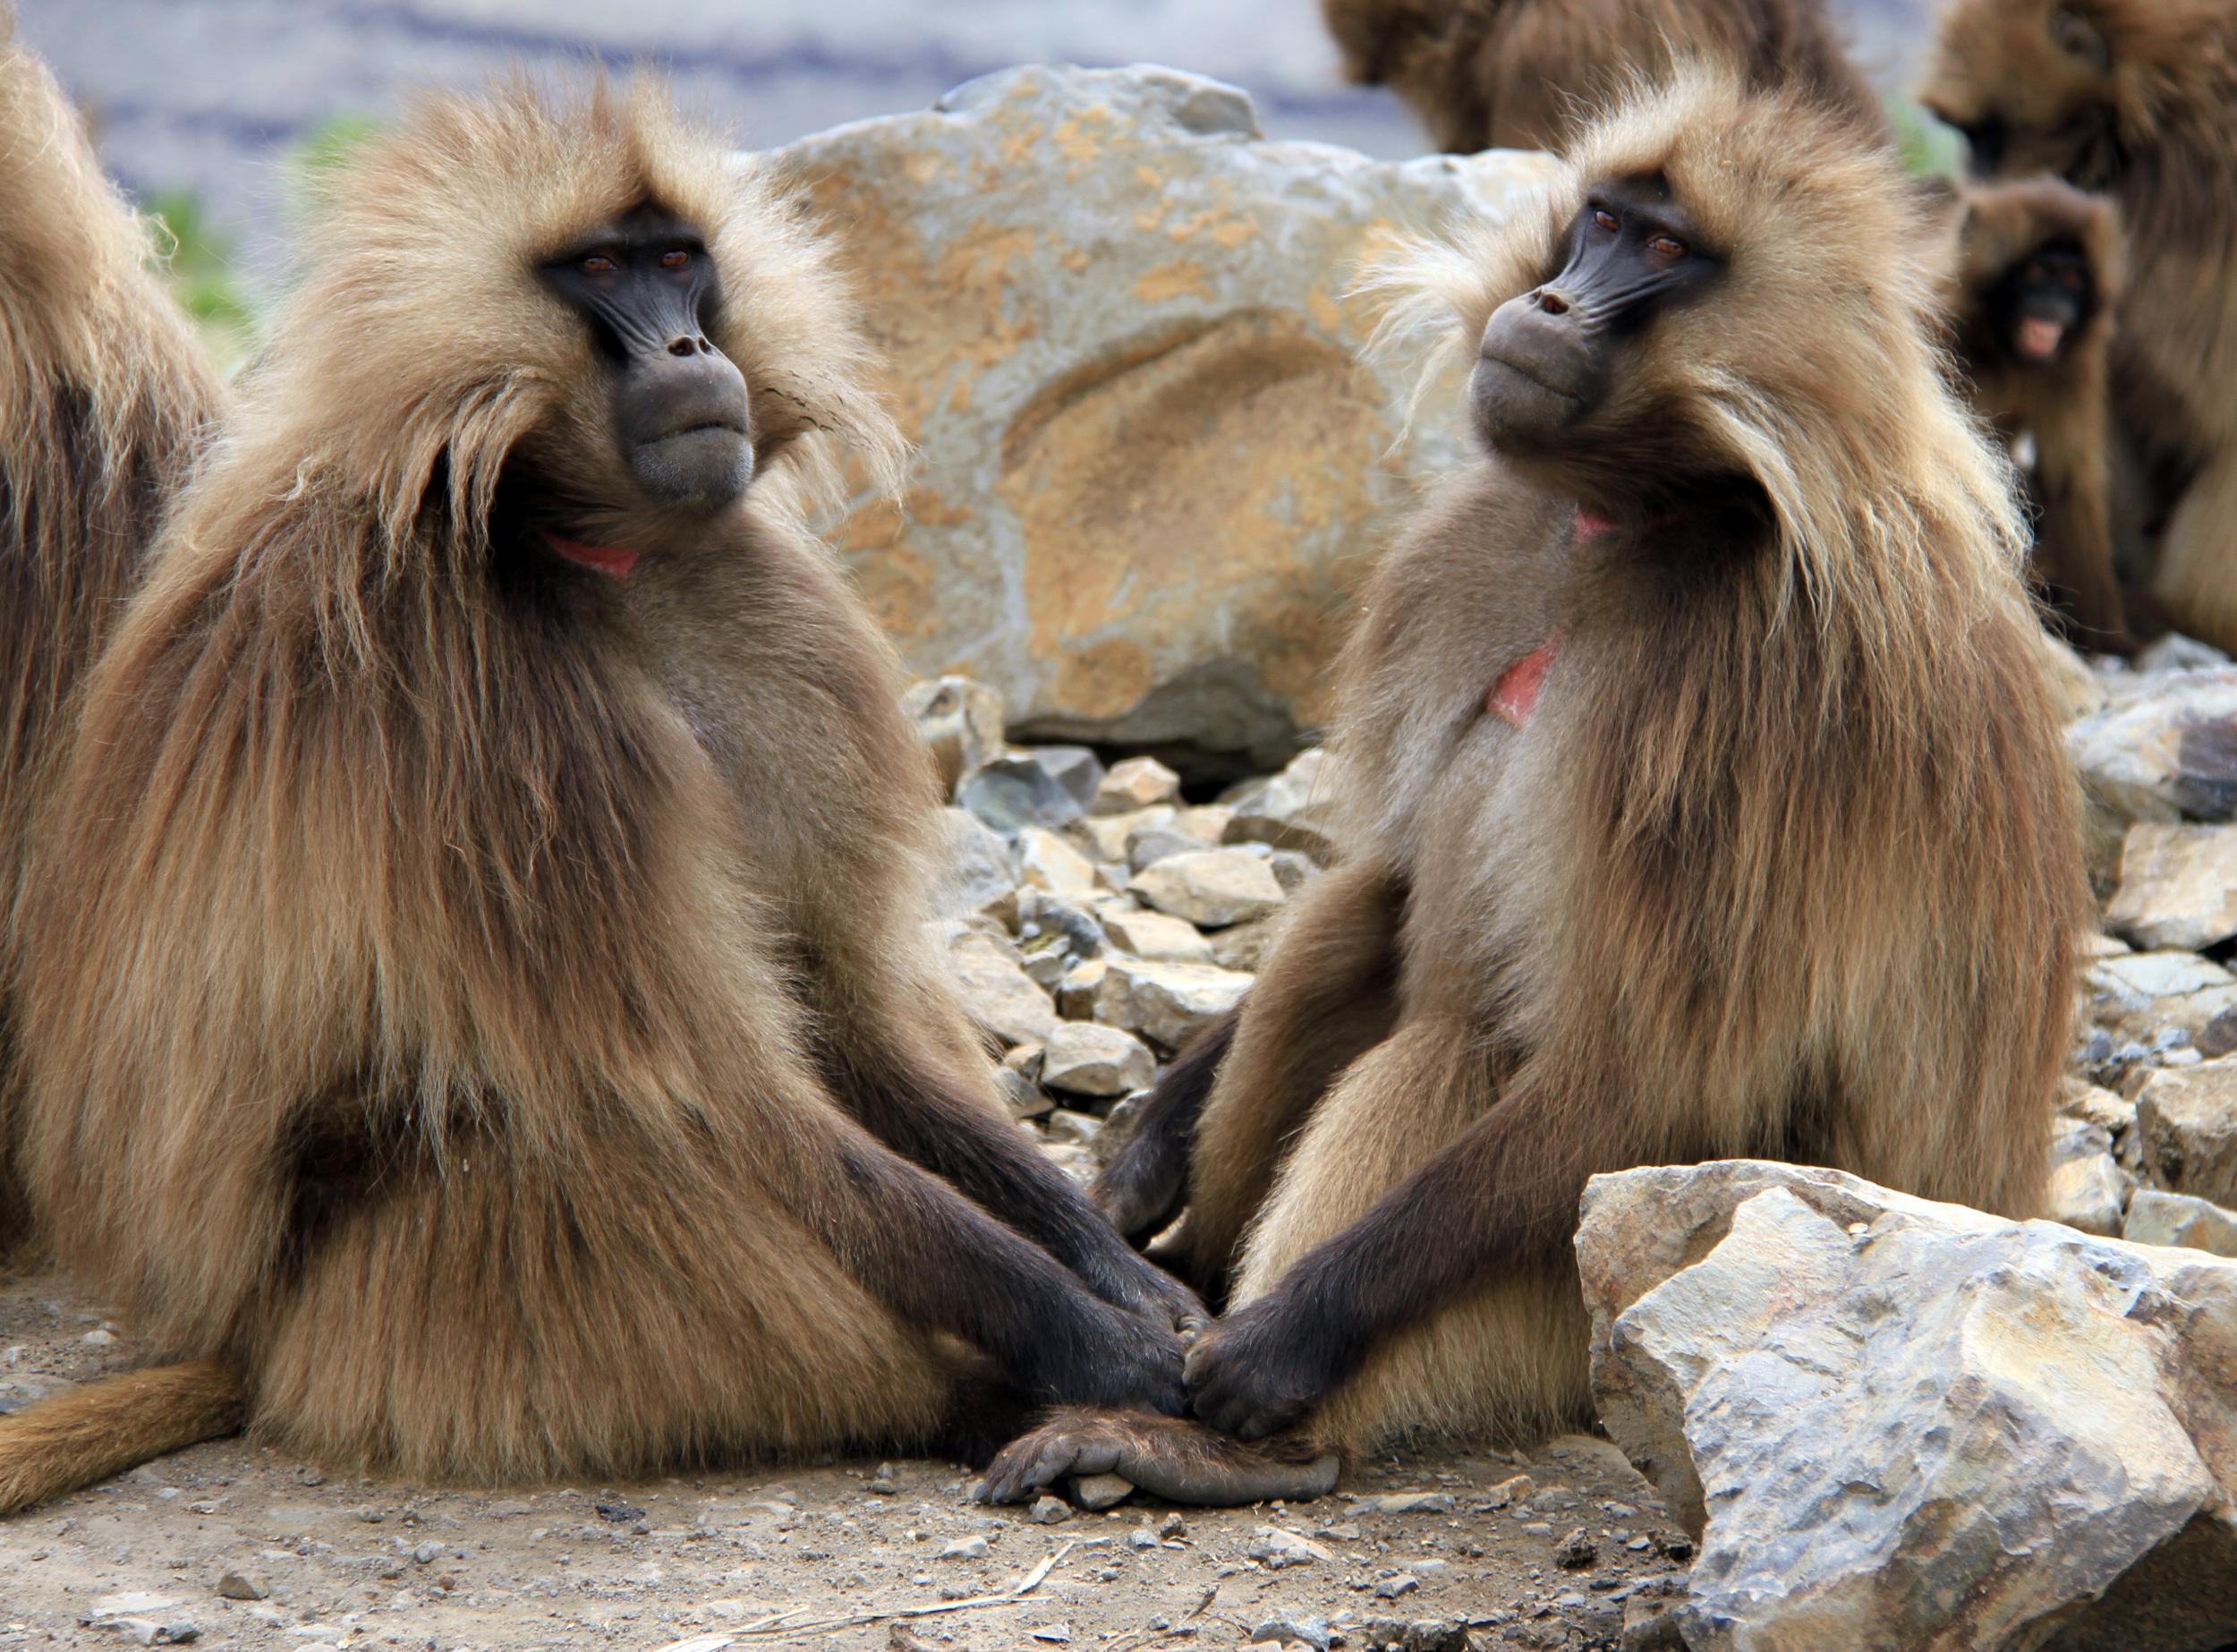 Gelada monkeys are a common sight in the Simien Mountains